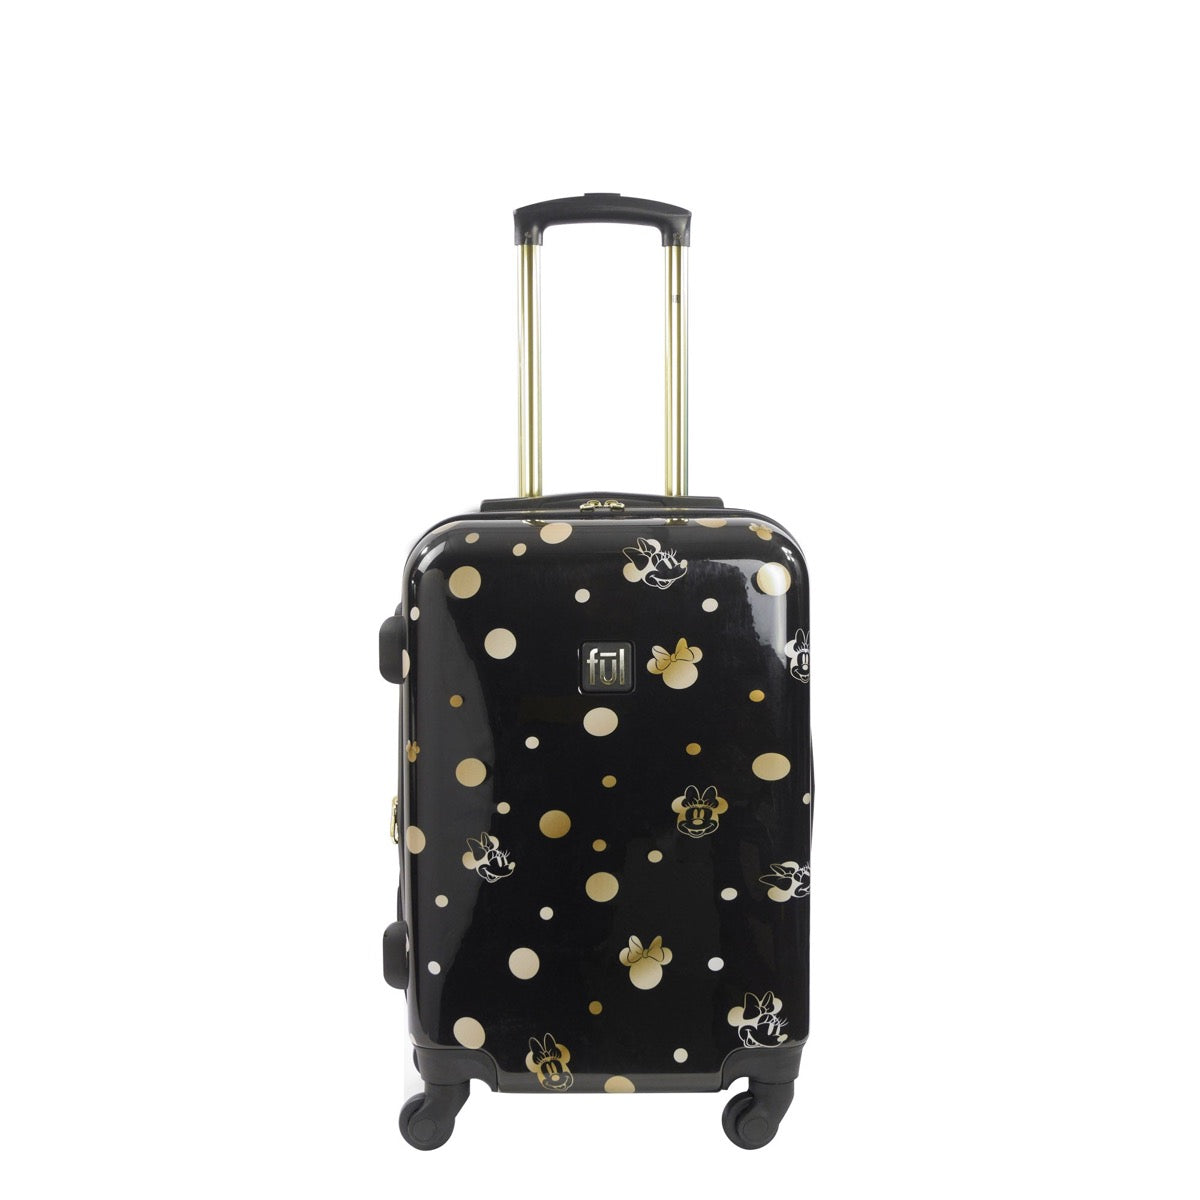 FUL Disney Golden Disney Hard-Sided 21" Minnie Mouse Carry-On Suitcase Luggage